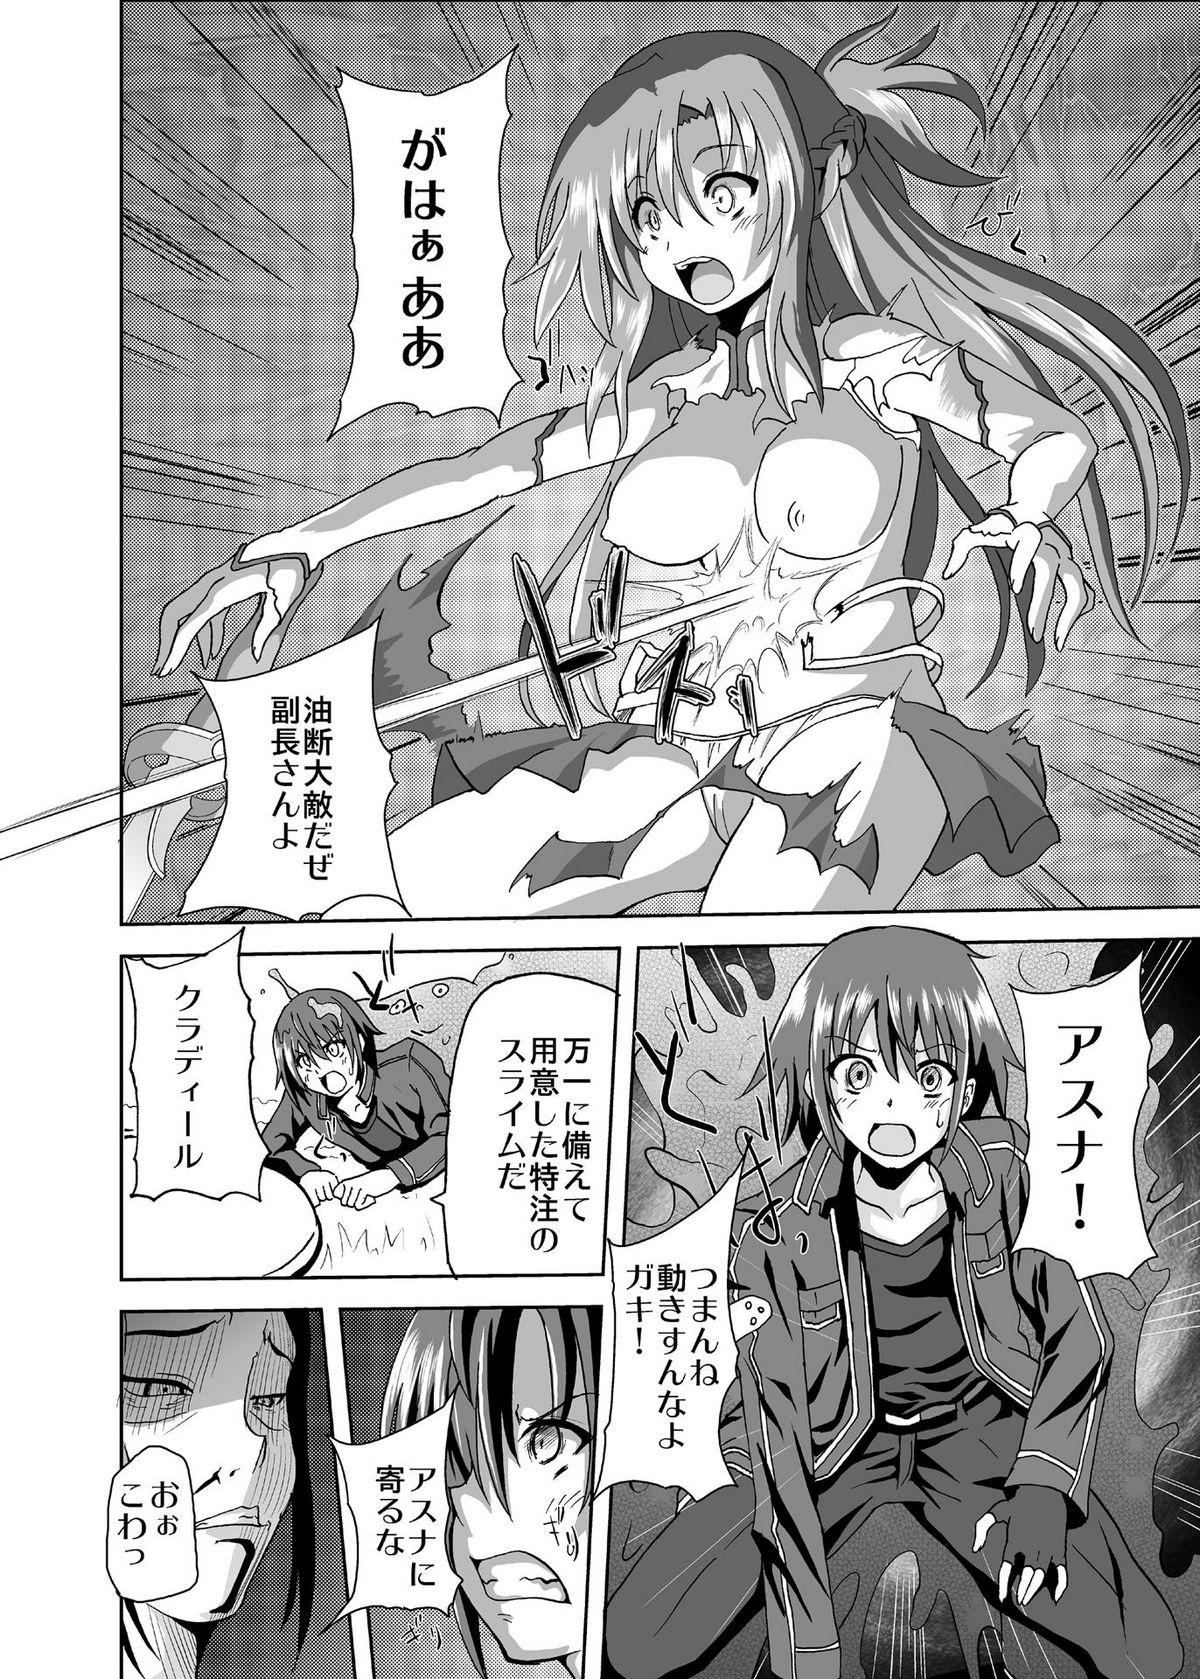 Moreno Defeated Heroine A - Sword art online Girls Getting Fucked - Page 5